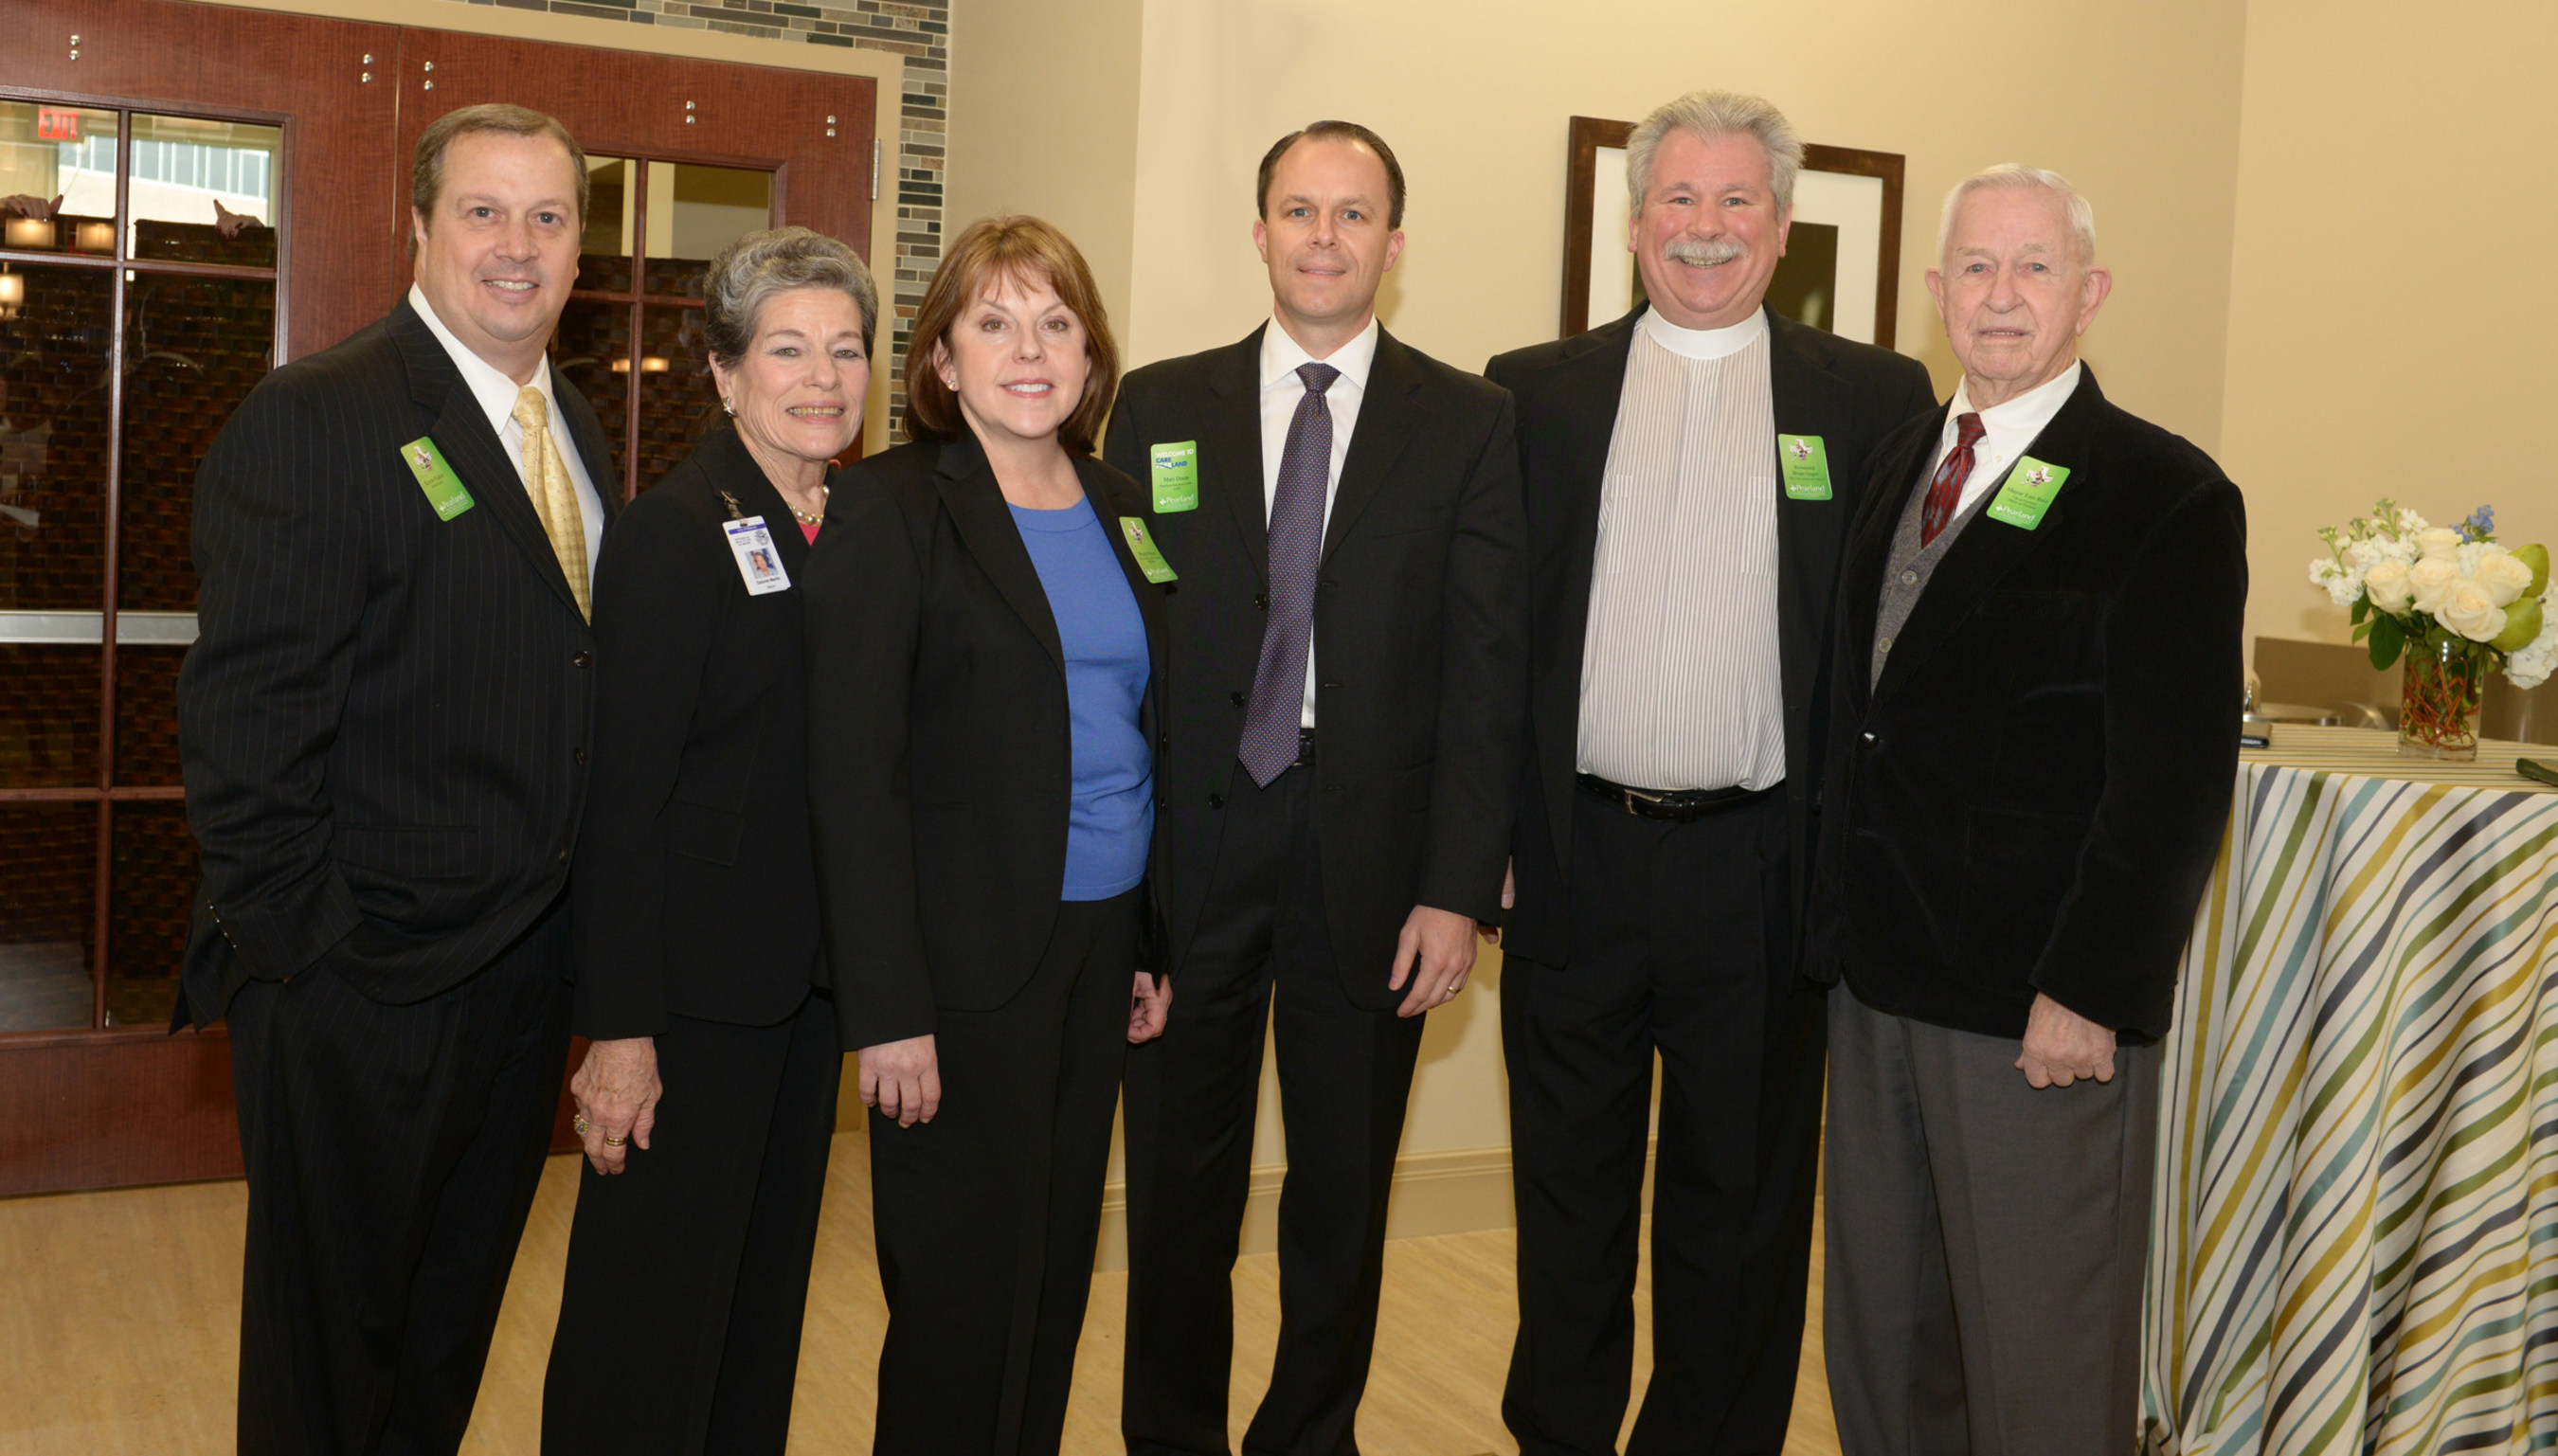 Pearland Medical Center Board of Trustees Chairman, Kevin Fuller; Manvel Mayor, Delores Martin; HCA Gulf Coast Division President, Maura Walsh; Pearland Medical Center CEO, Matt Dixon; Reverend Brian Gigee; and Pearland Mayor, Tom Reid.